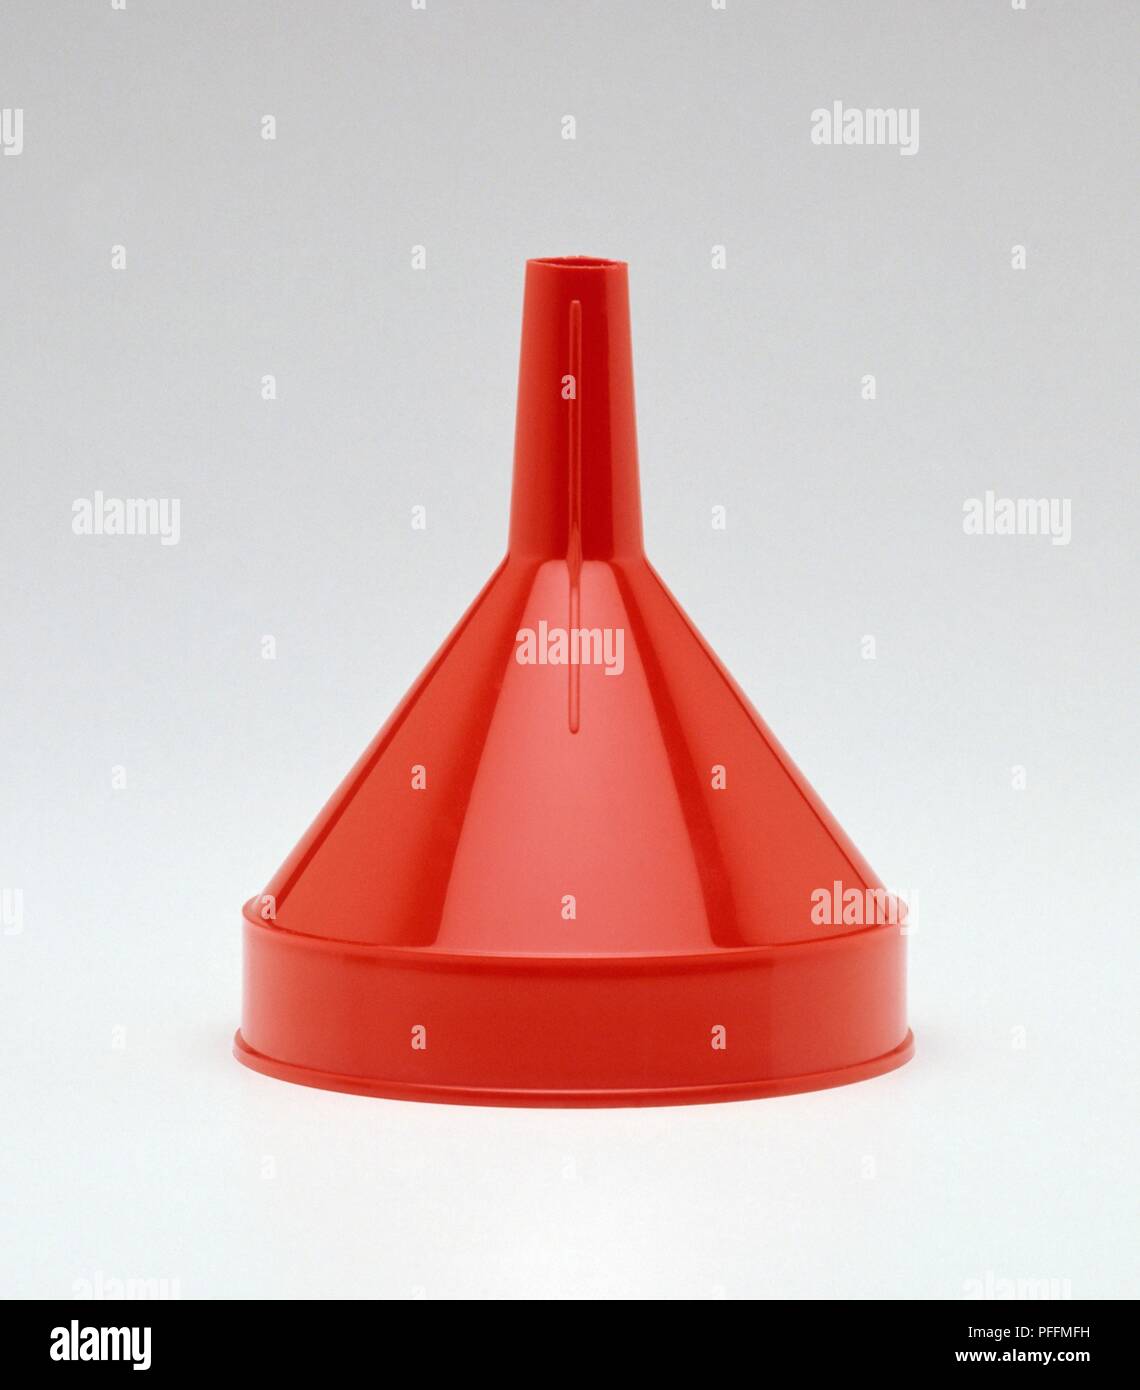 A red plastic funnel Stock Photo